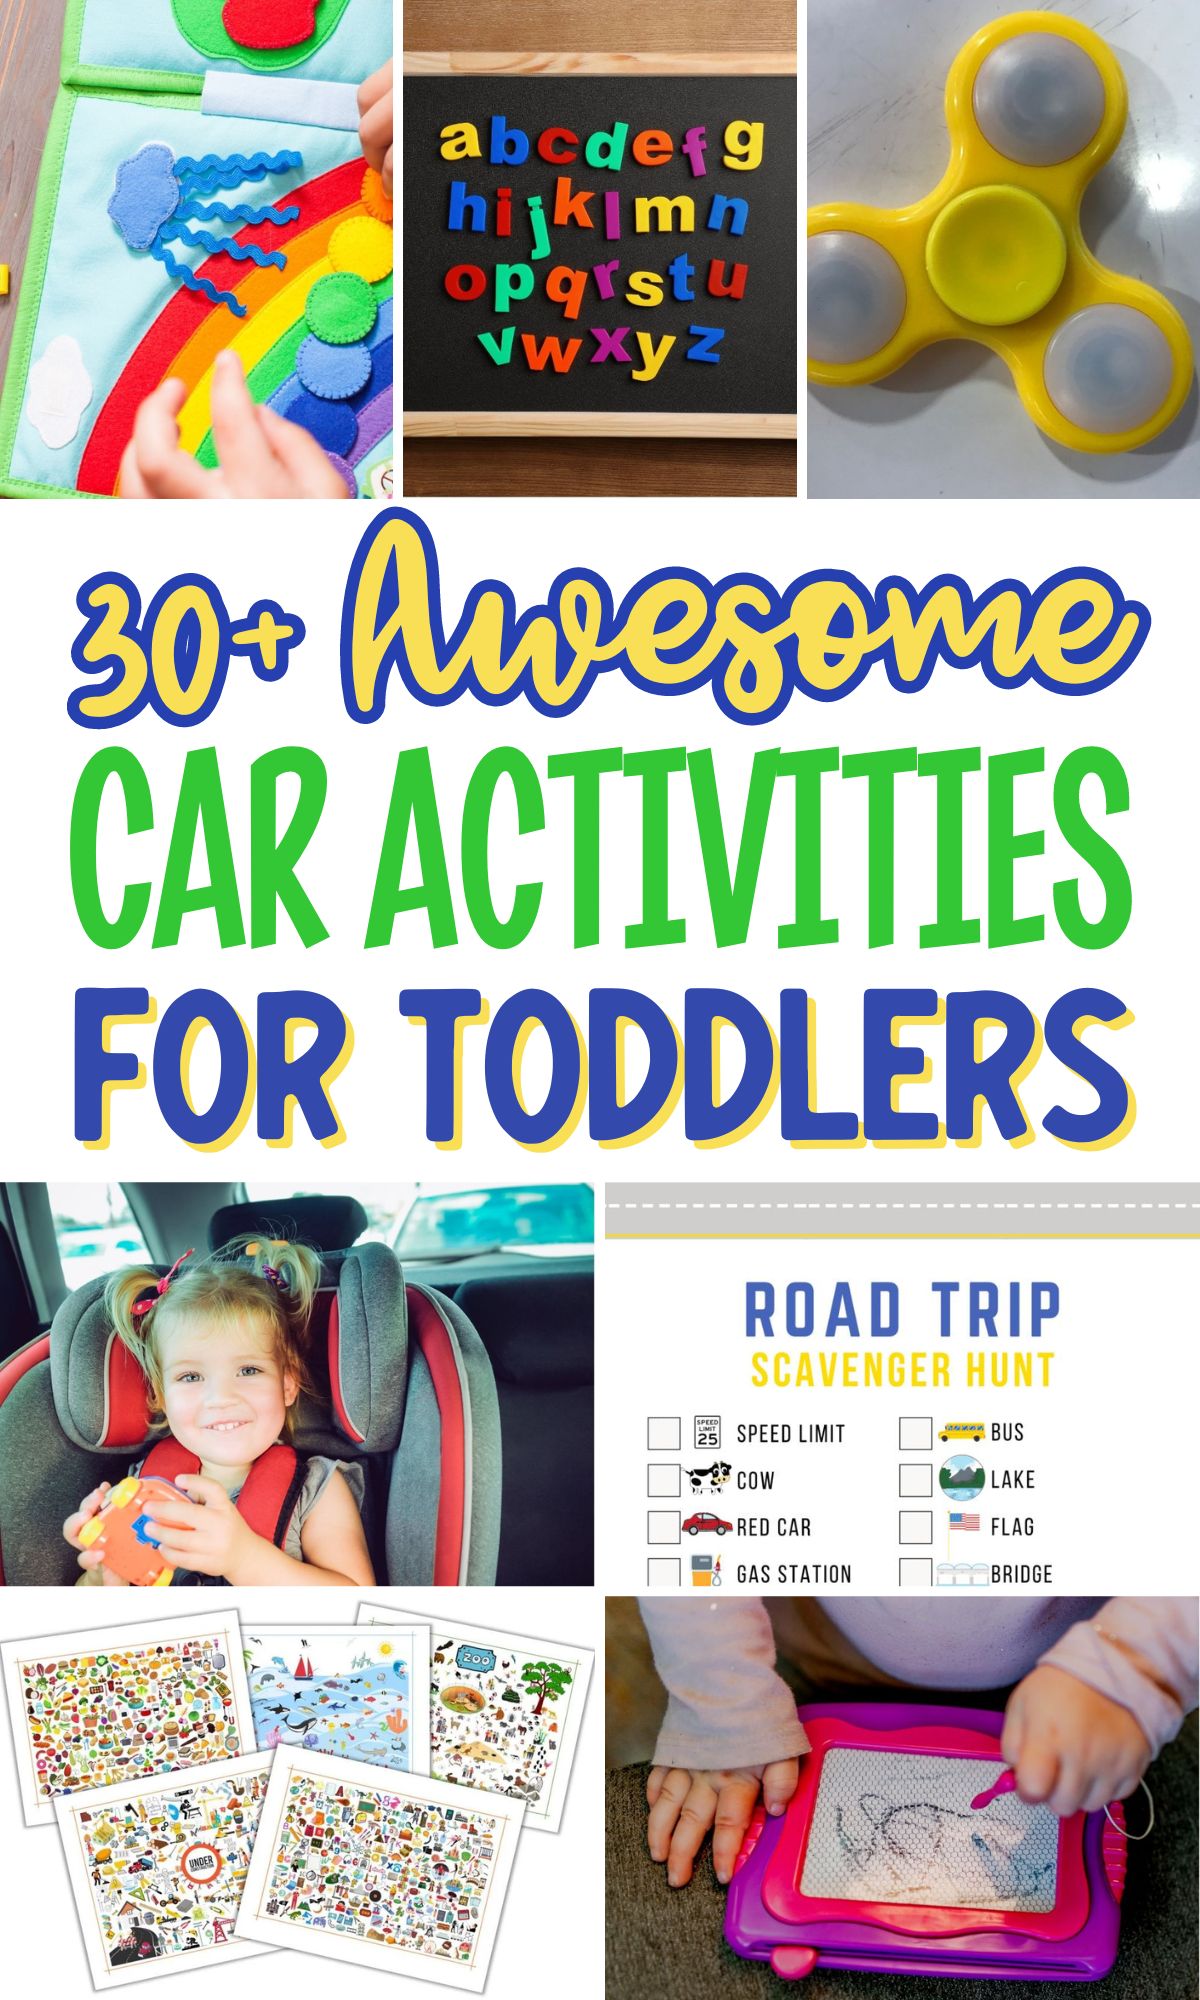 Image graphic with text that reads "30+ Awesome Car Activities for Toddlers" and a collage of activity ideas.